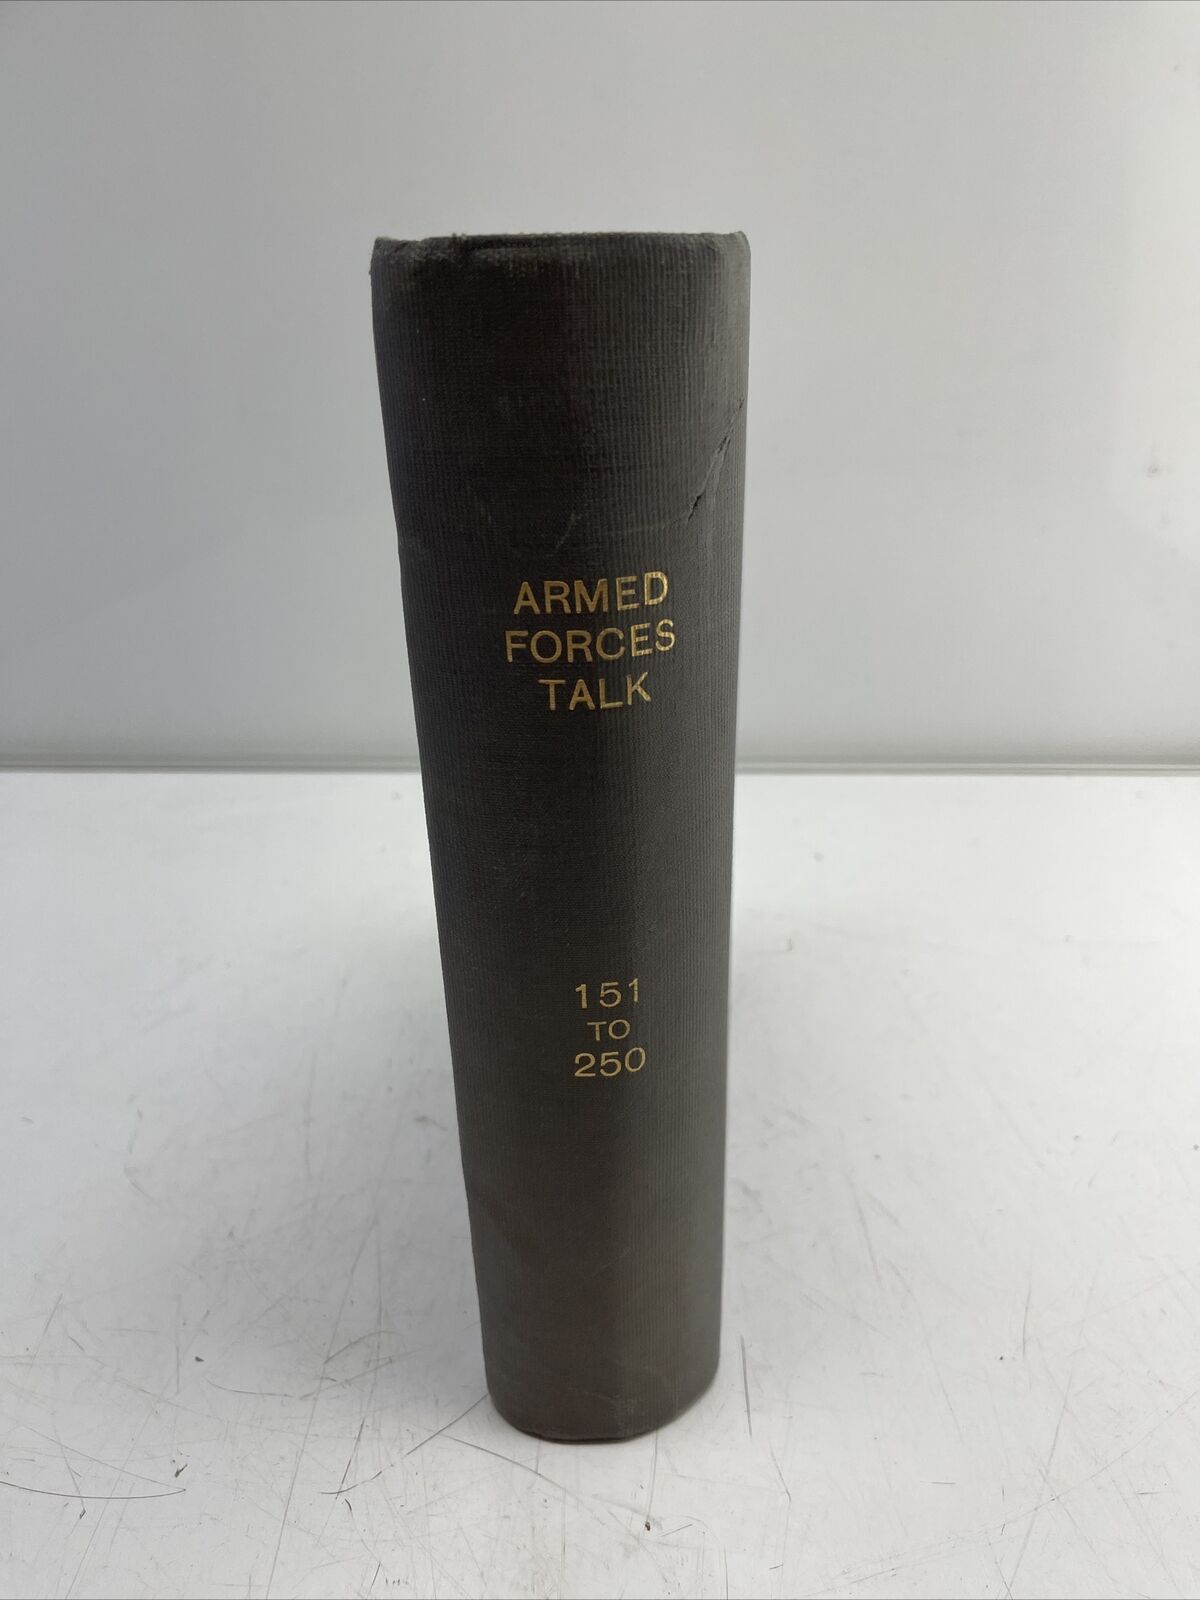 Armed Forces Talk Magazines Lot No. 151-250